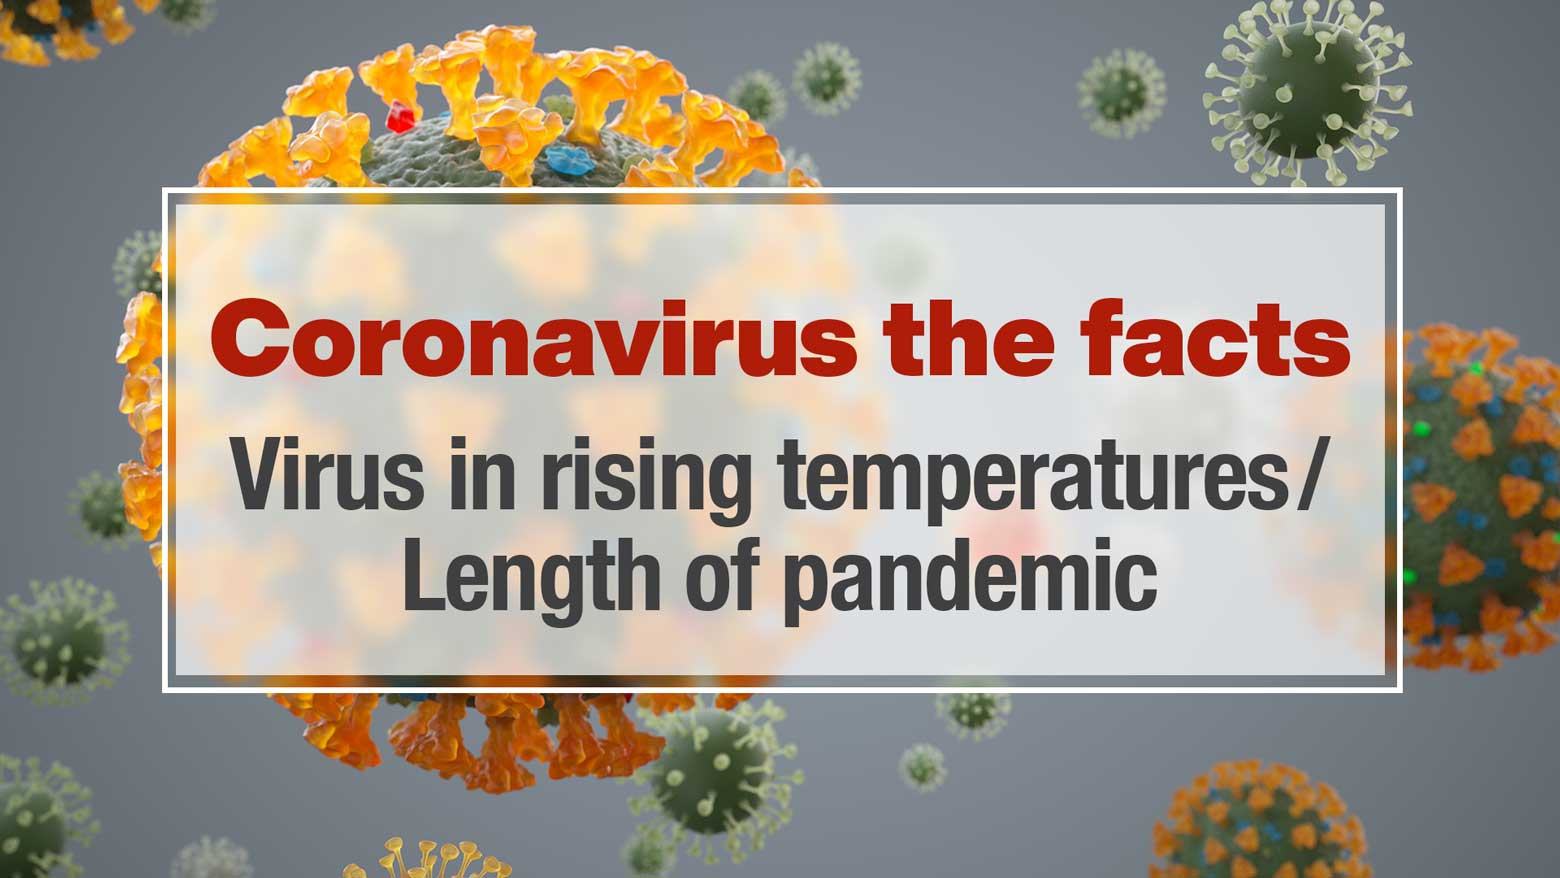 Will coronavirus slow as temperatures rise?
How long will the pandemic last?